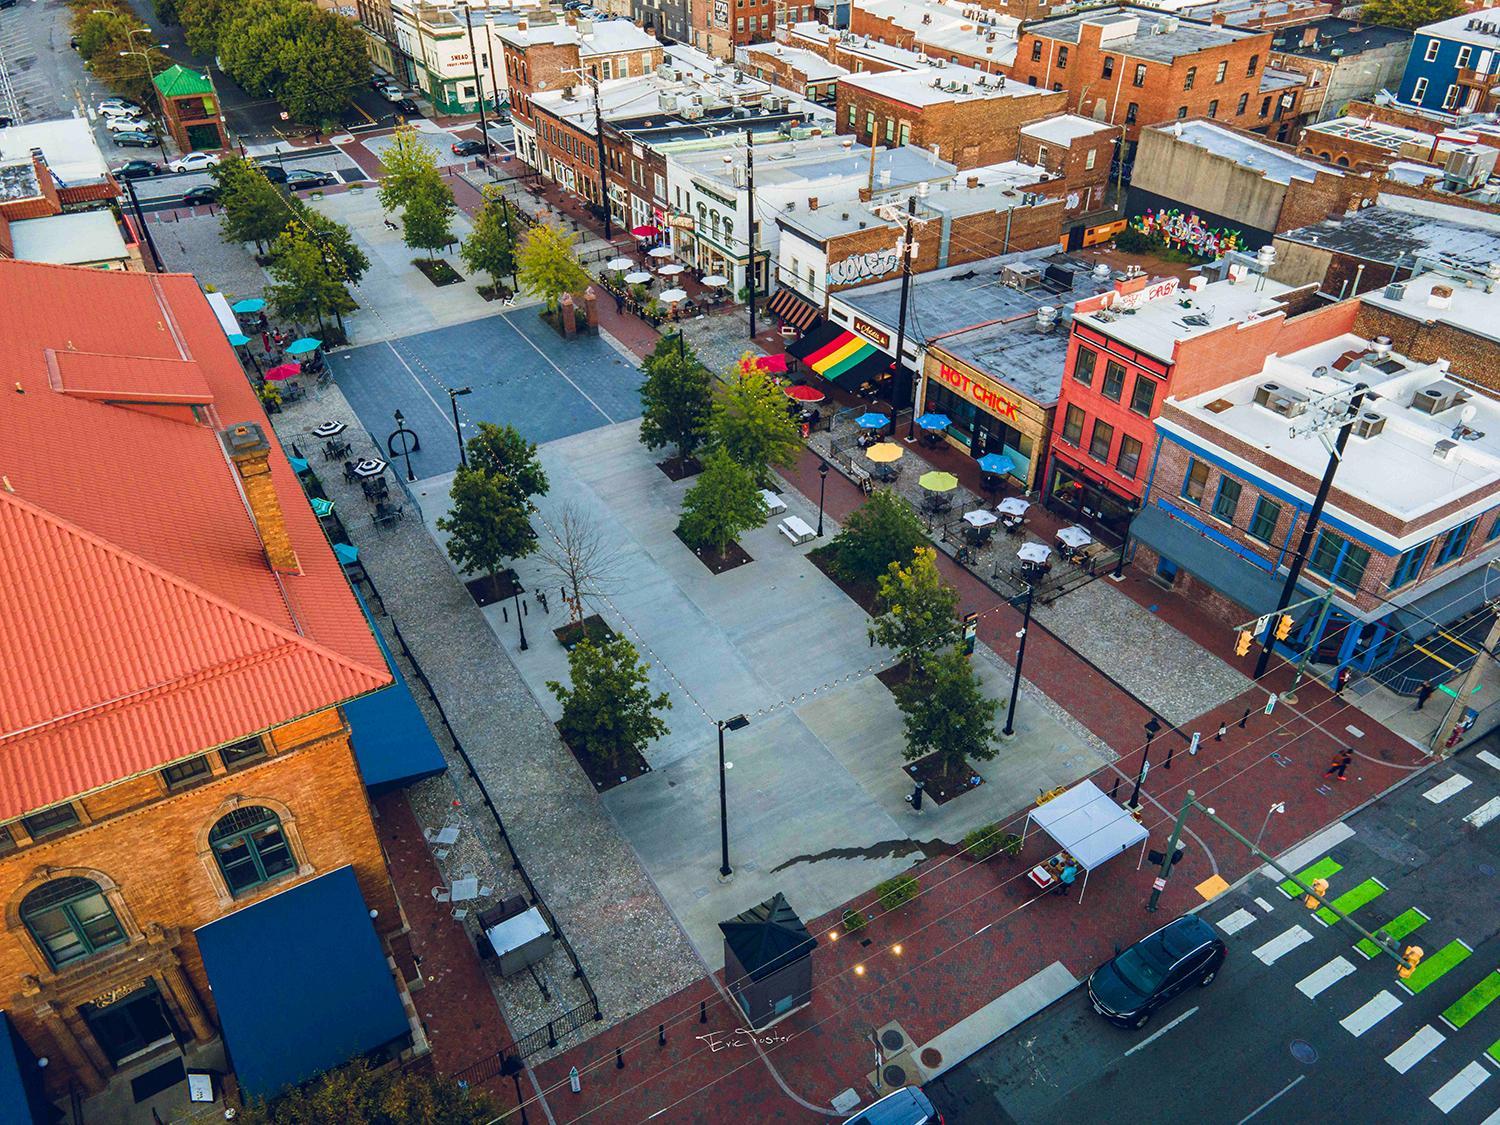 Overhead image of the 17th Street Market, featuring cars, brick walkways and buildings, and green plants